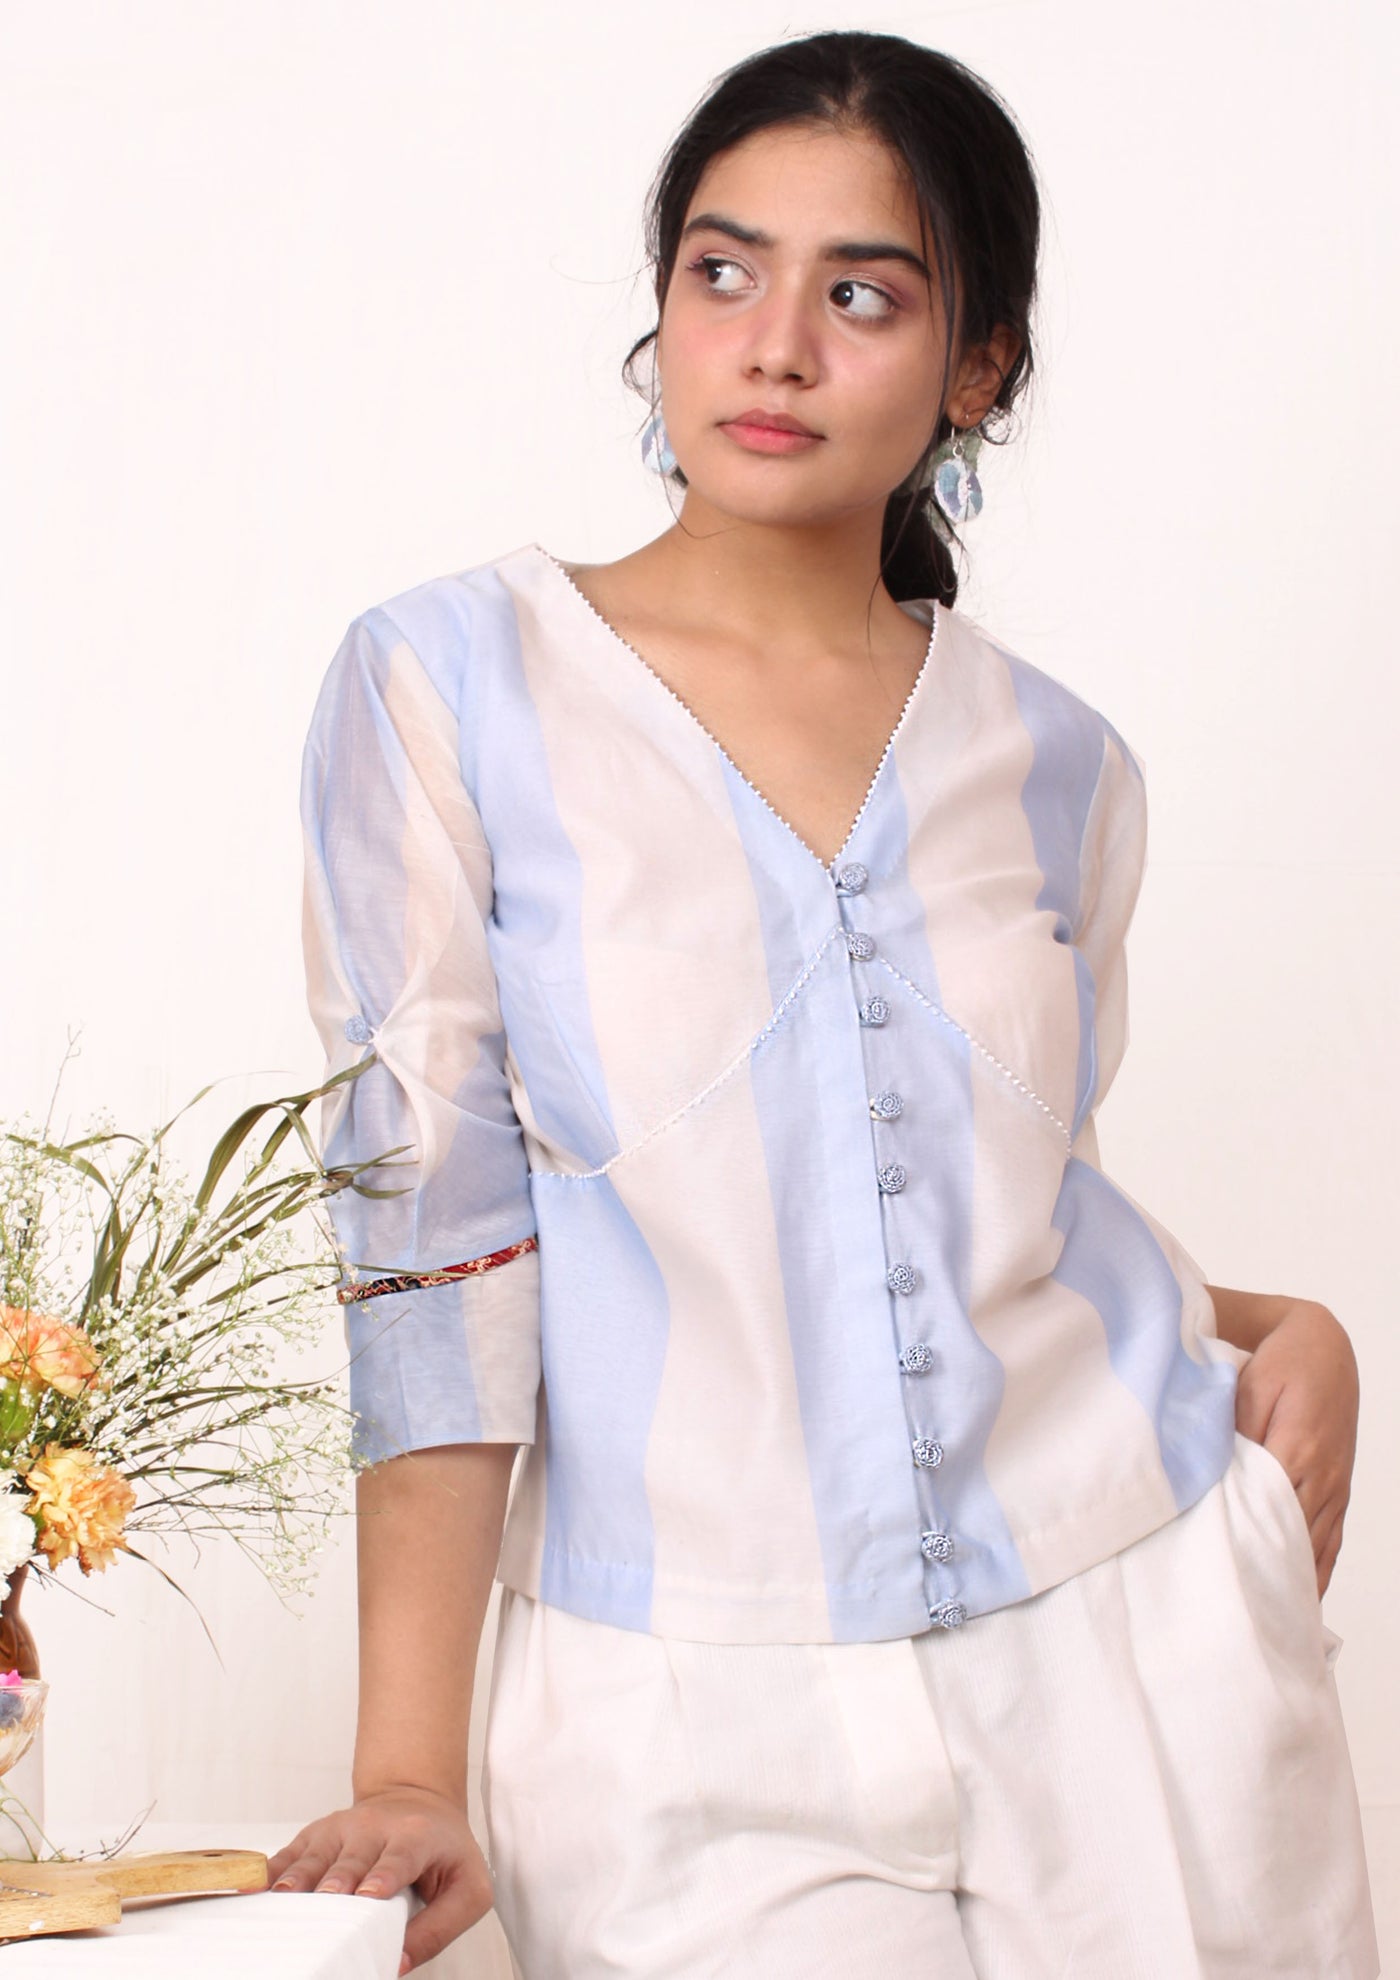 A V neck top with blue stripes, sleeve details and front opening